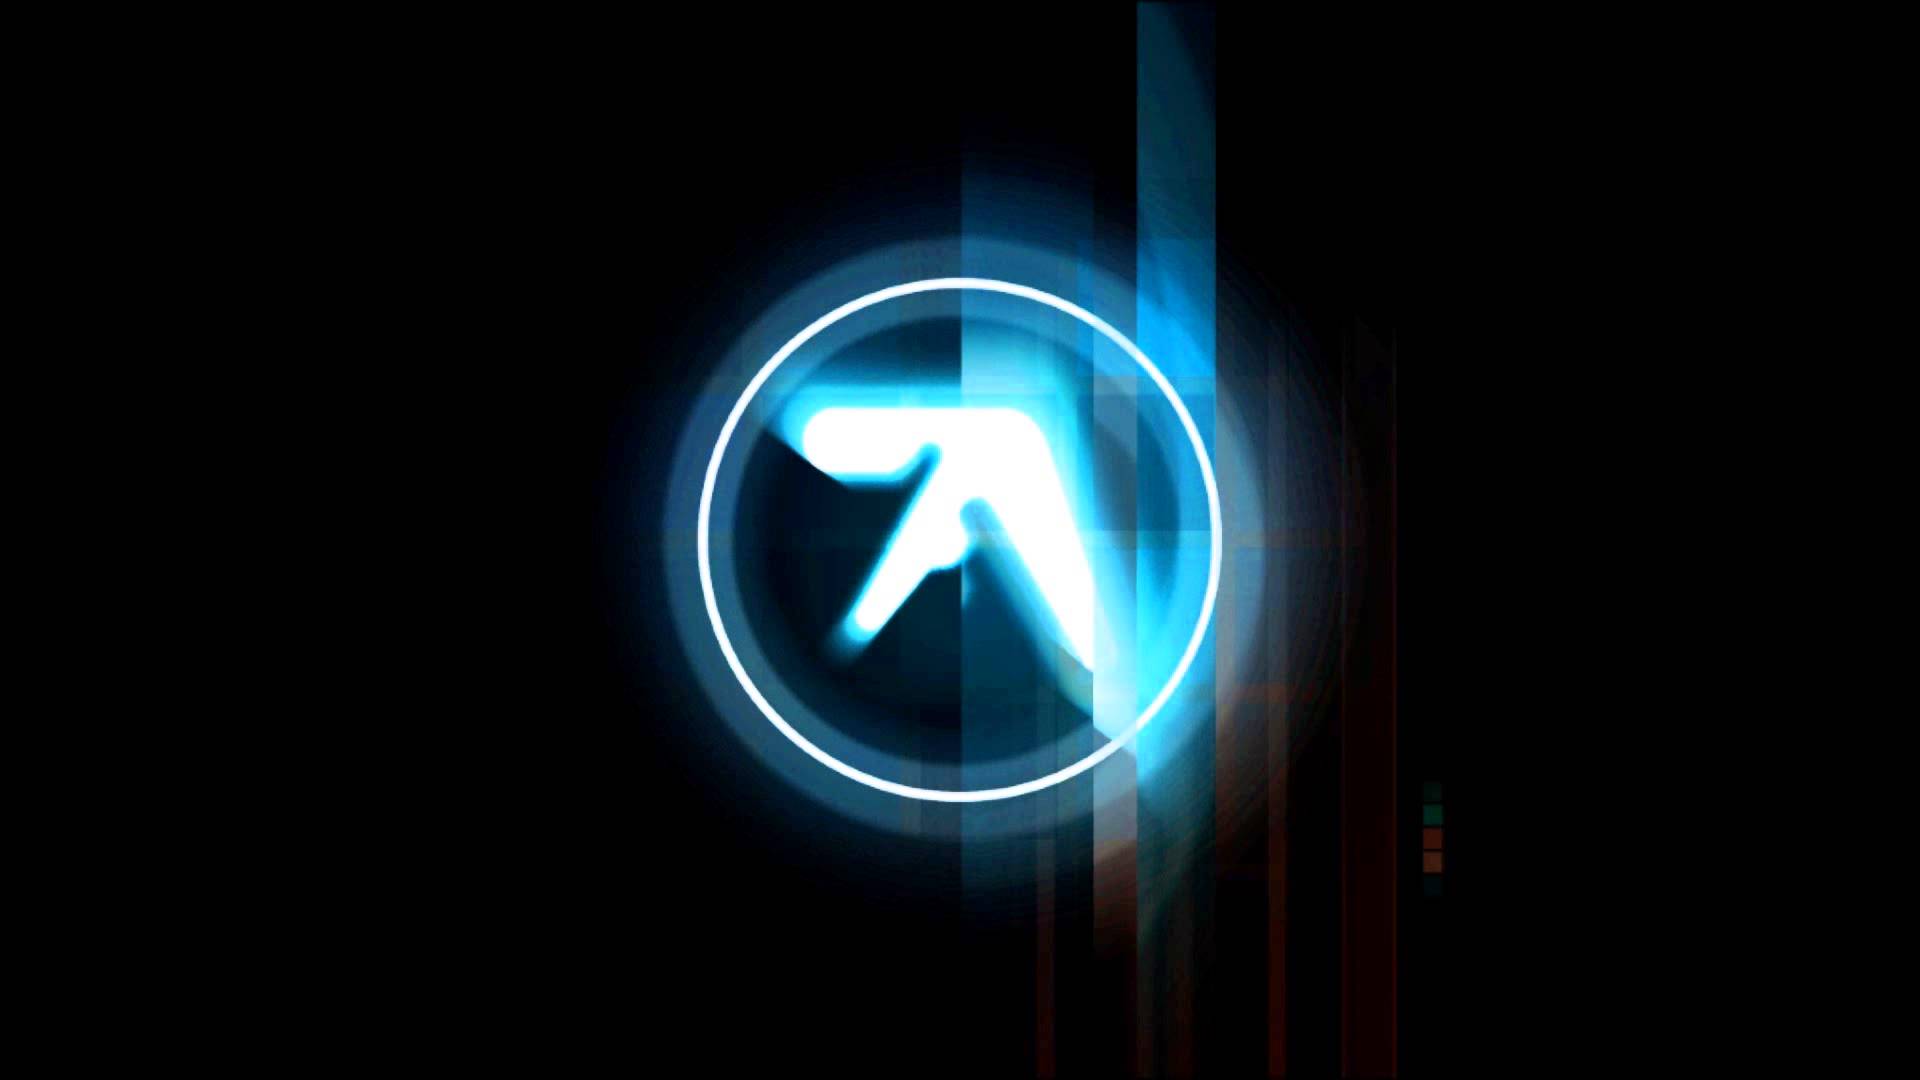 Aphex Twin Hd Wallpapers